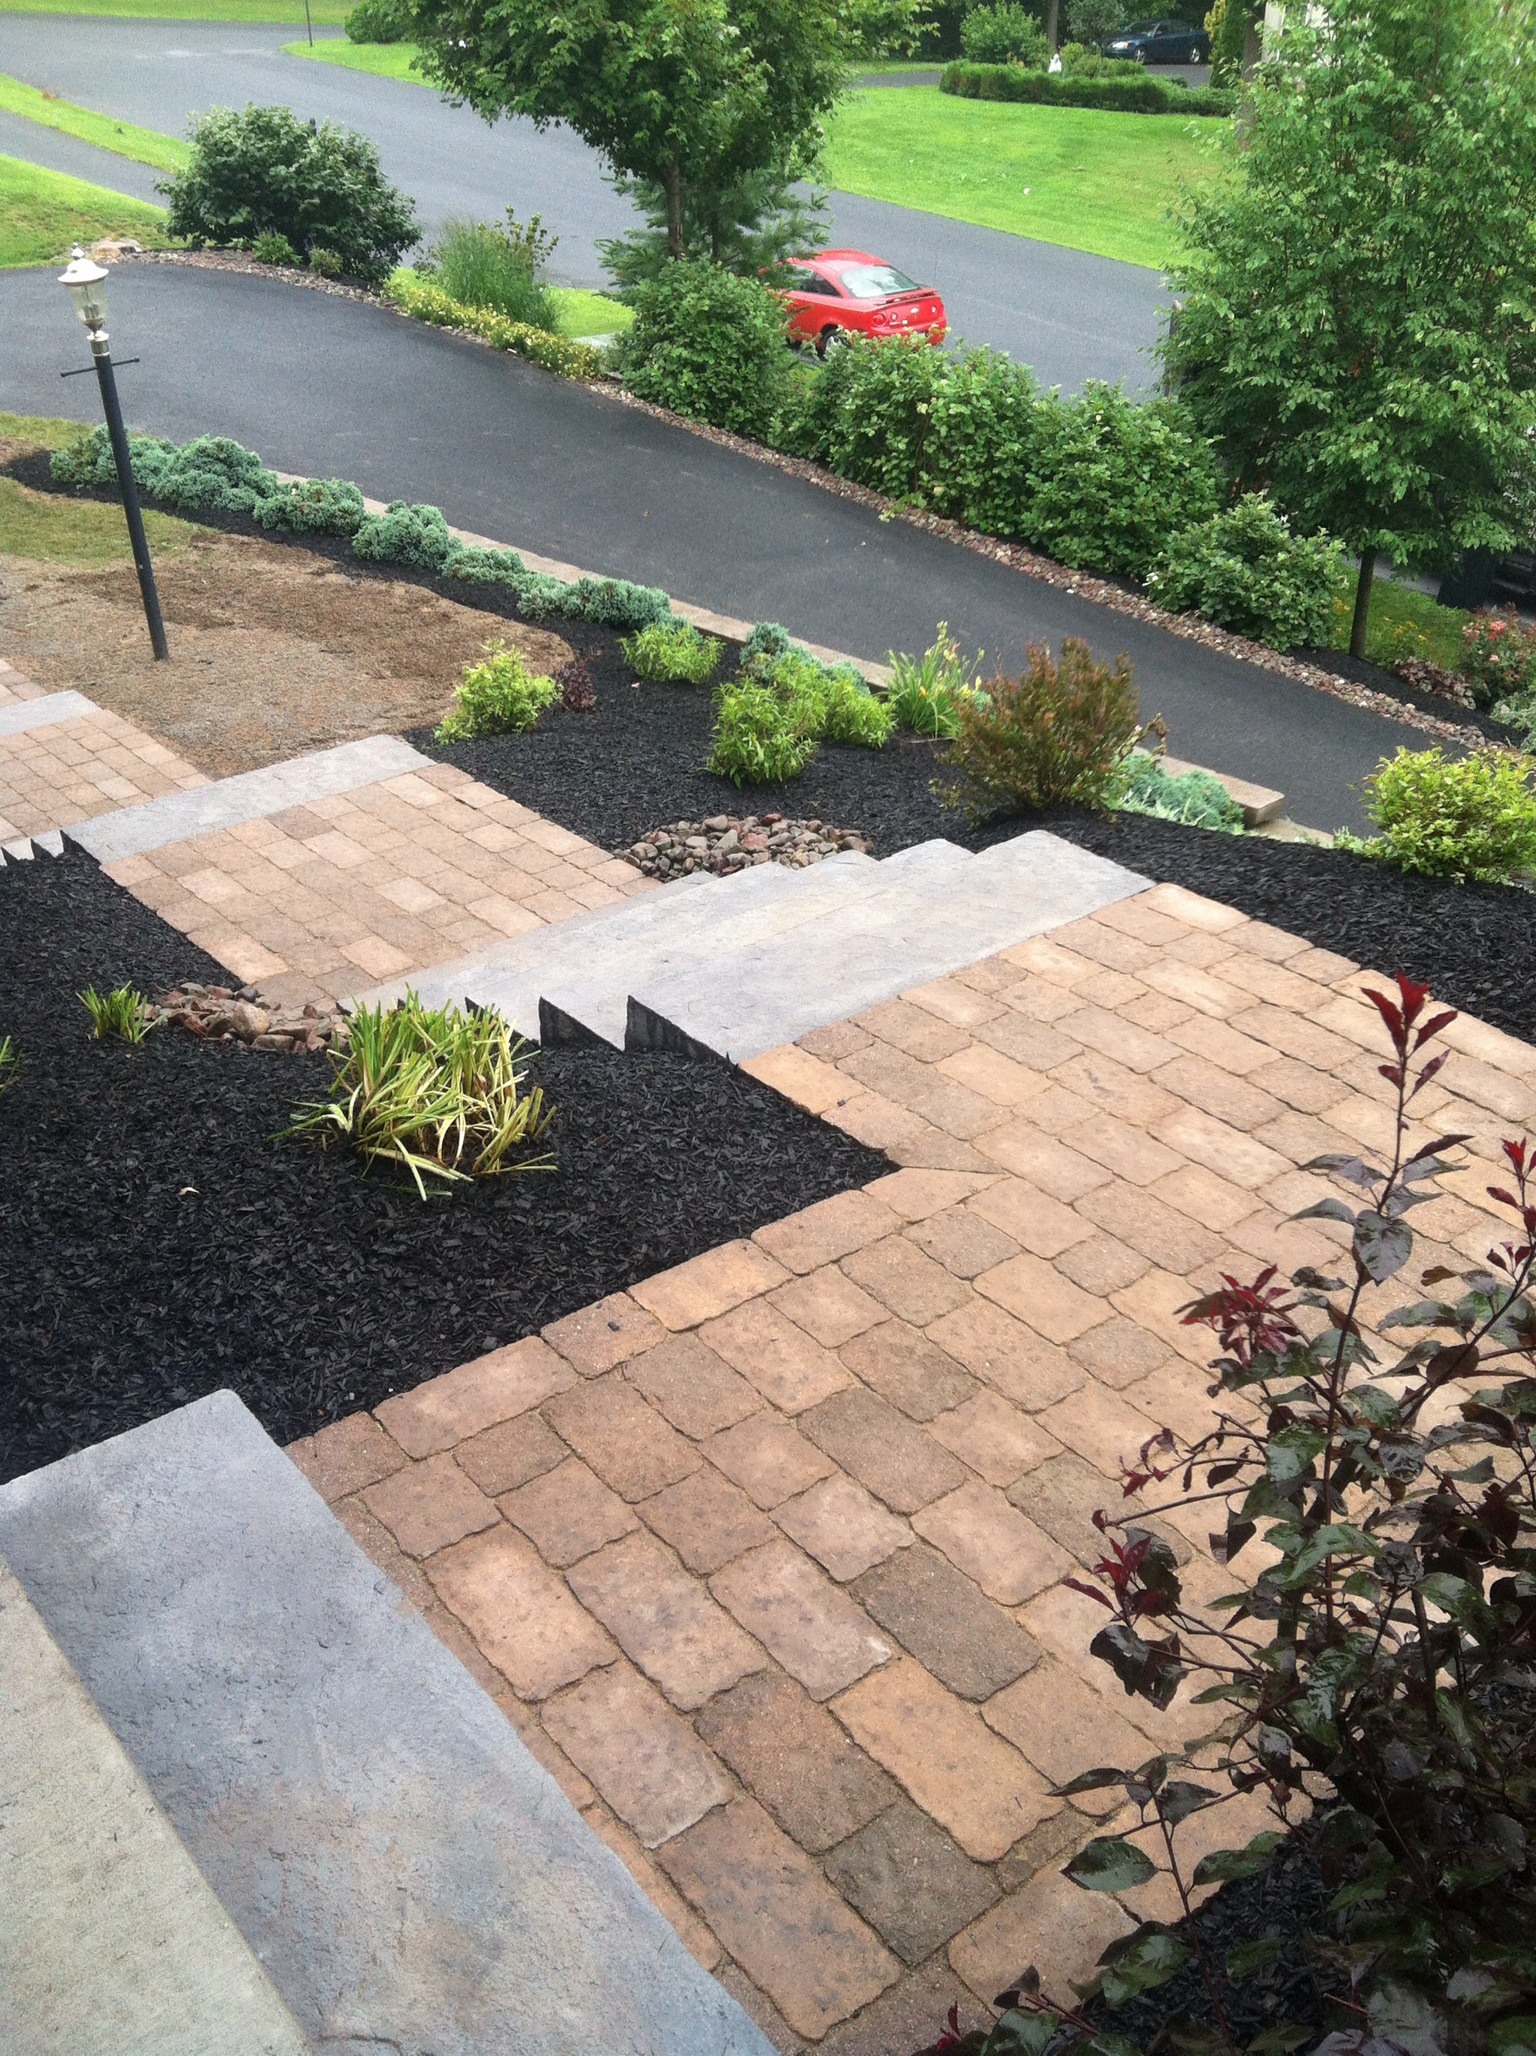 Professional landscape maintenance company in South Whitehall, PA